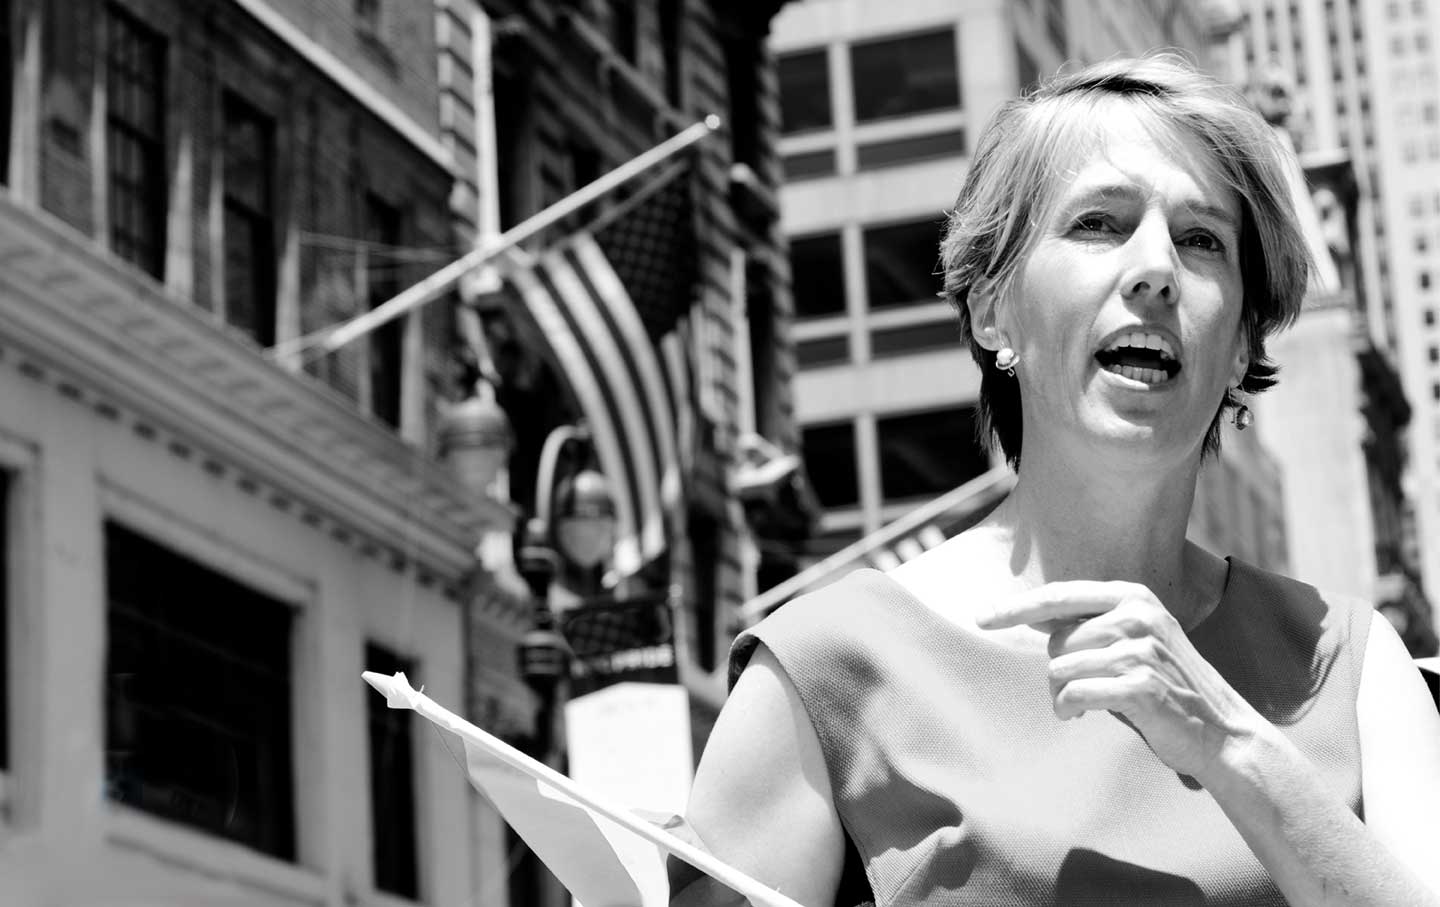 Zephyr Teachout Is Battling Big Money and Cynicism in One of This Year’s Tightest Congressional Races